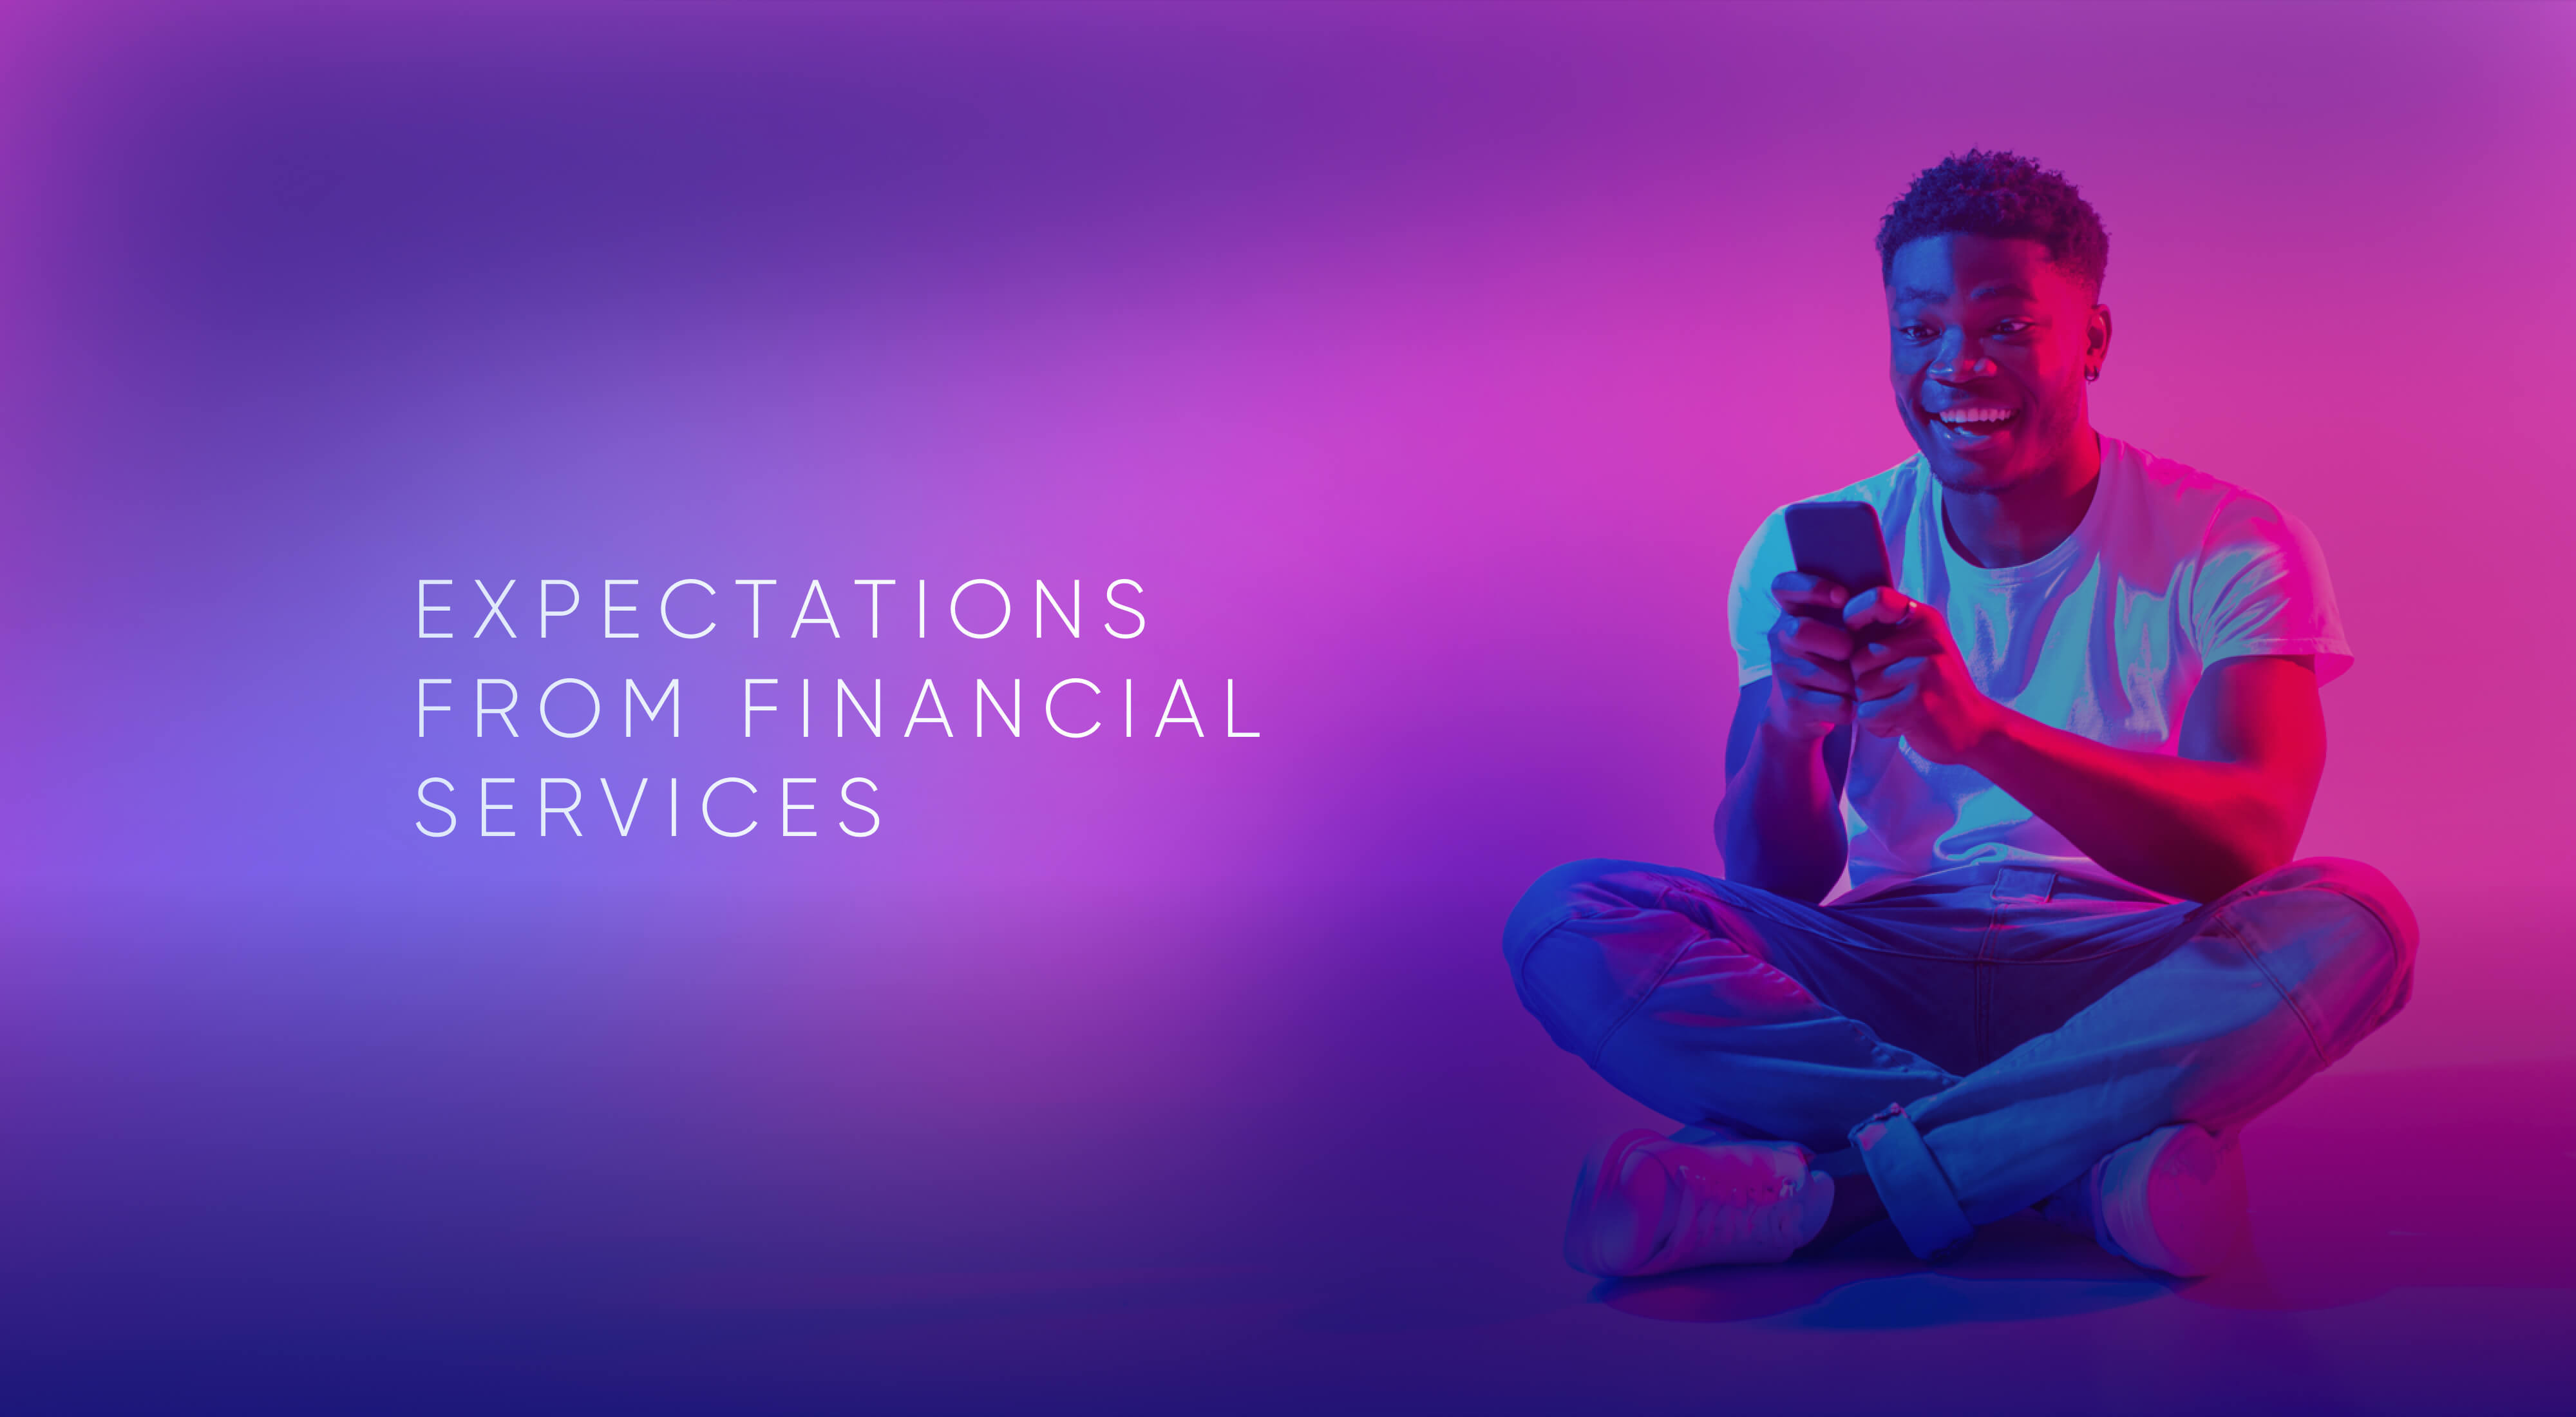 What Are The Digital Customer Expectations From Banking And Financial Services